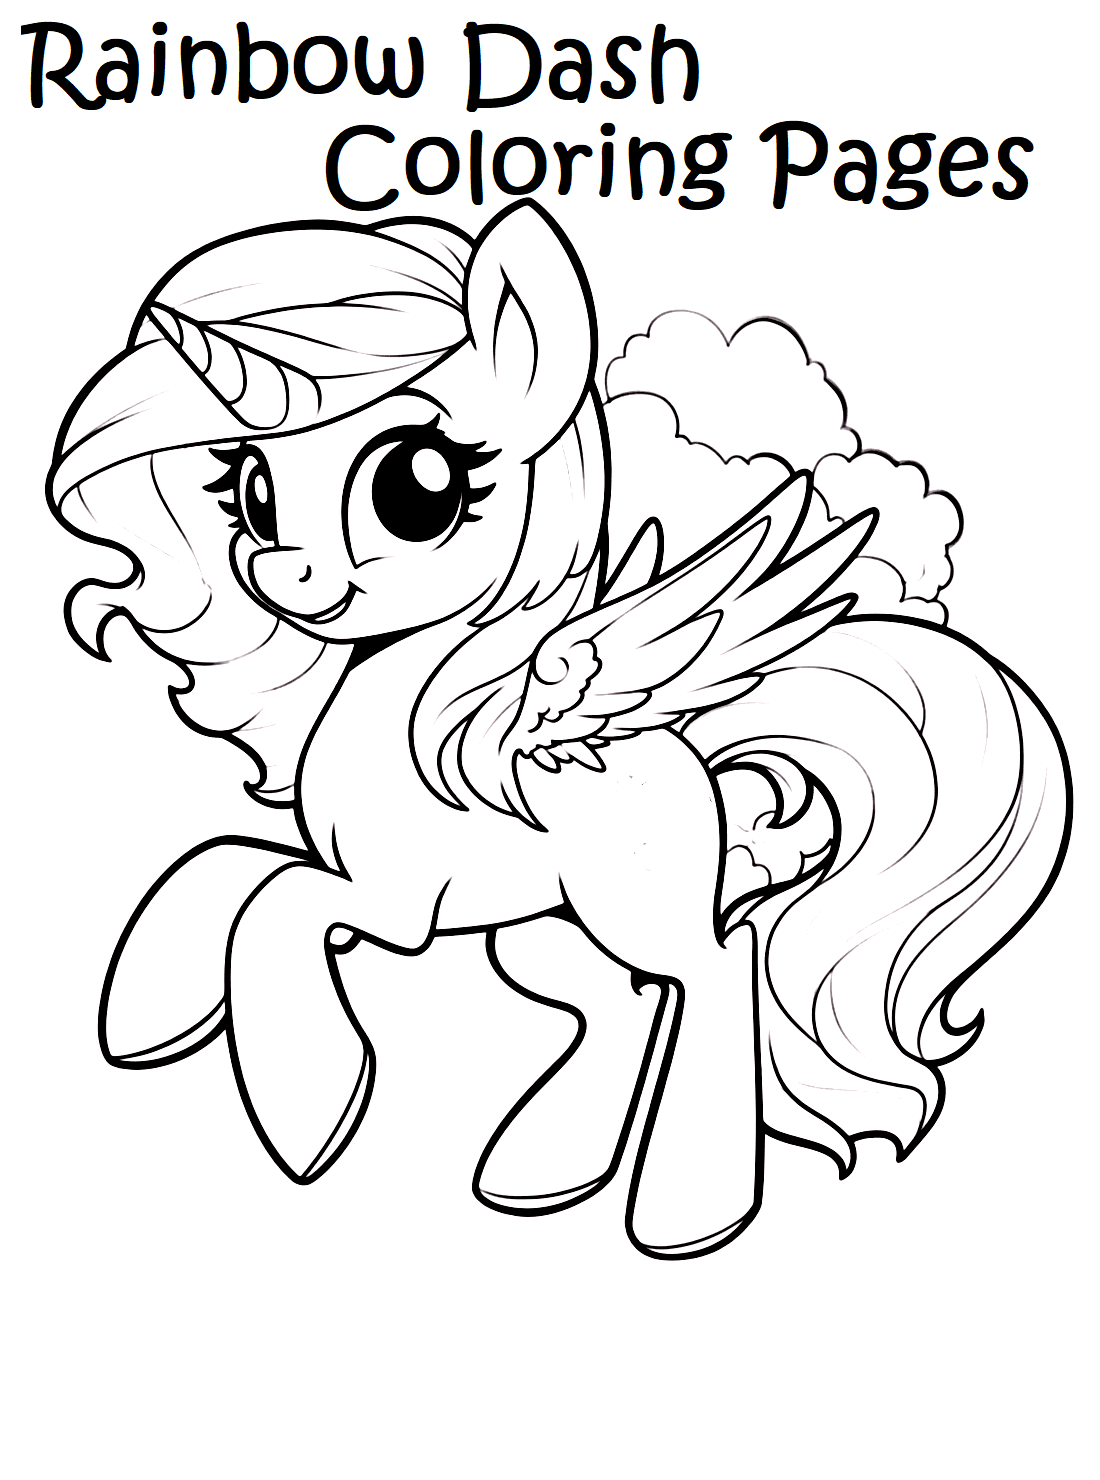 Coloring online free on x rainbow dash coloring pages free you can color online coloring sheets coloring pictures download and print for kids of all ages rainbowdash coloringonlinefree httpstcoaegovnbeb httpstcousvgulbek x